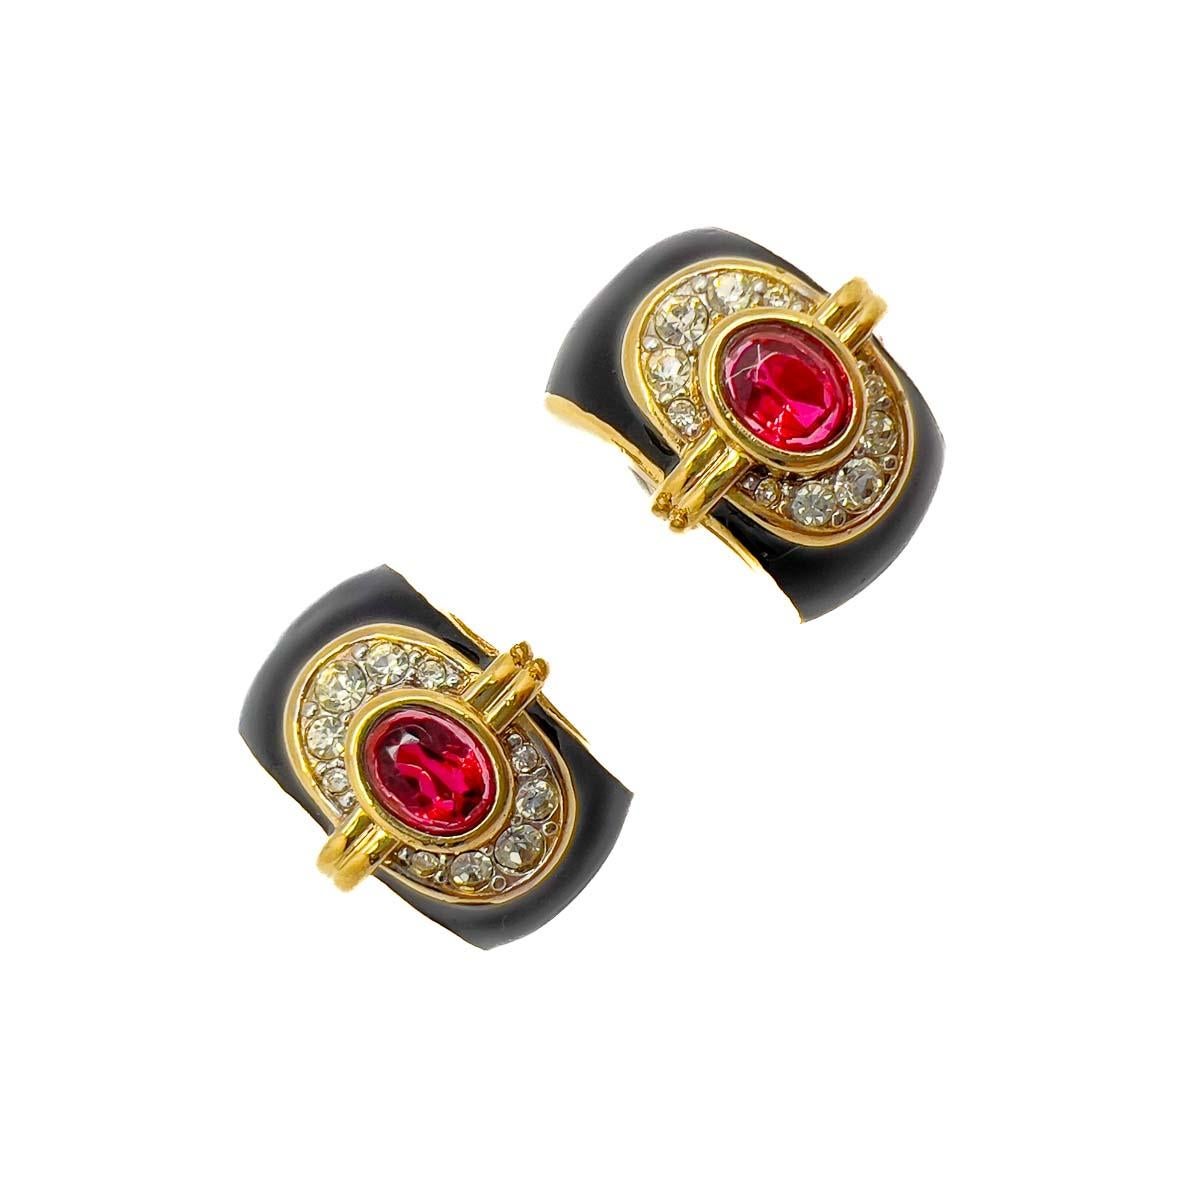 A sublime pair of Vintage Nina Ricci Art eco Earrings. Designed in a huggie style with a glorious and effortlessly timeless Art Deco design. The opulent black enamelling contrasting to perfection with the central oval ruby crystal. Finished with a